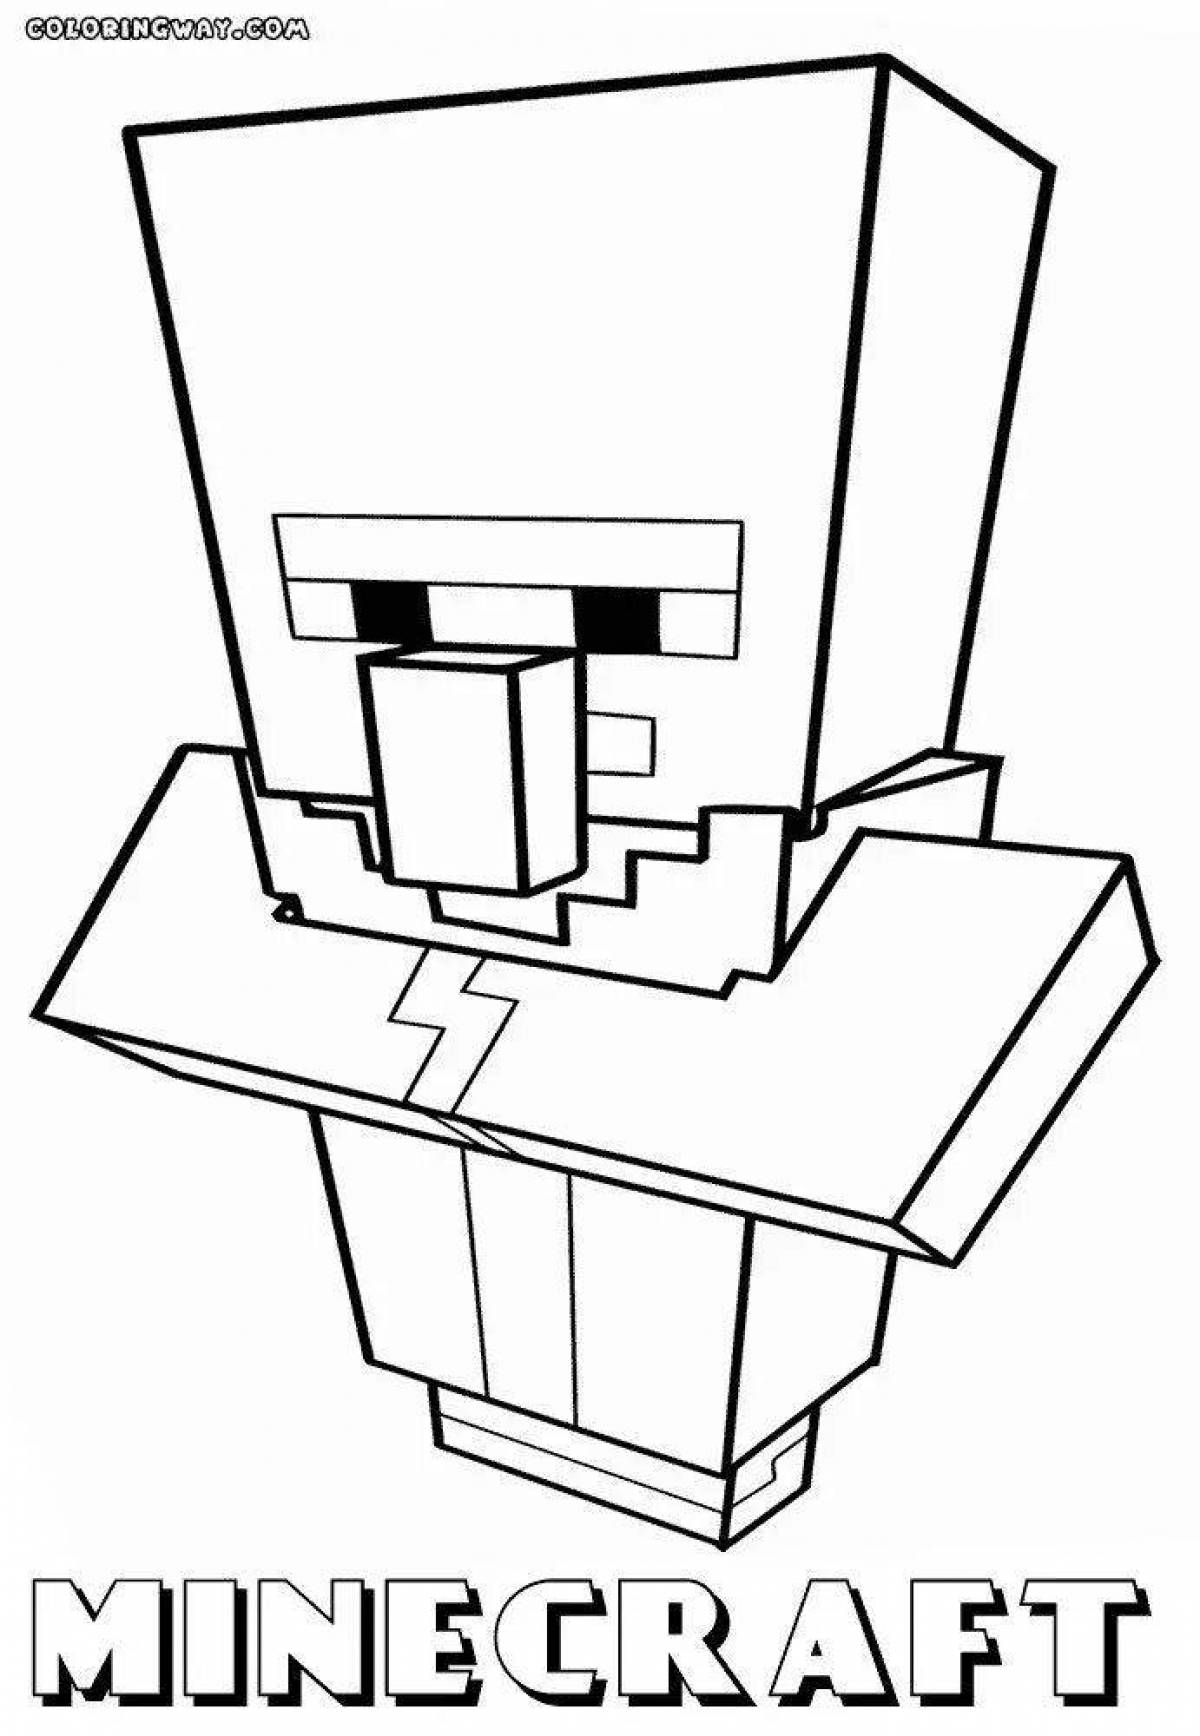 Amazing minecraft compote novel coloring page